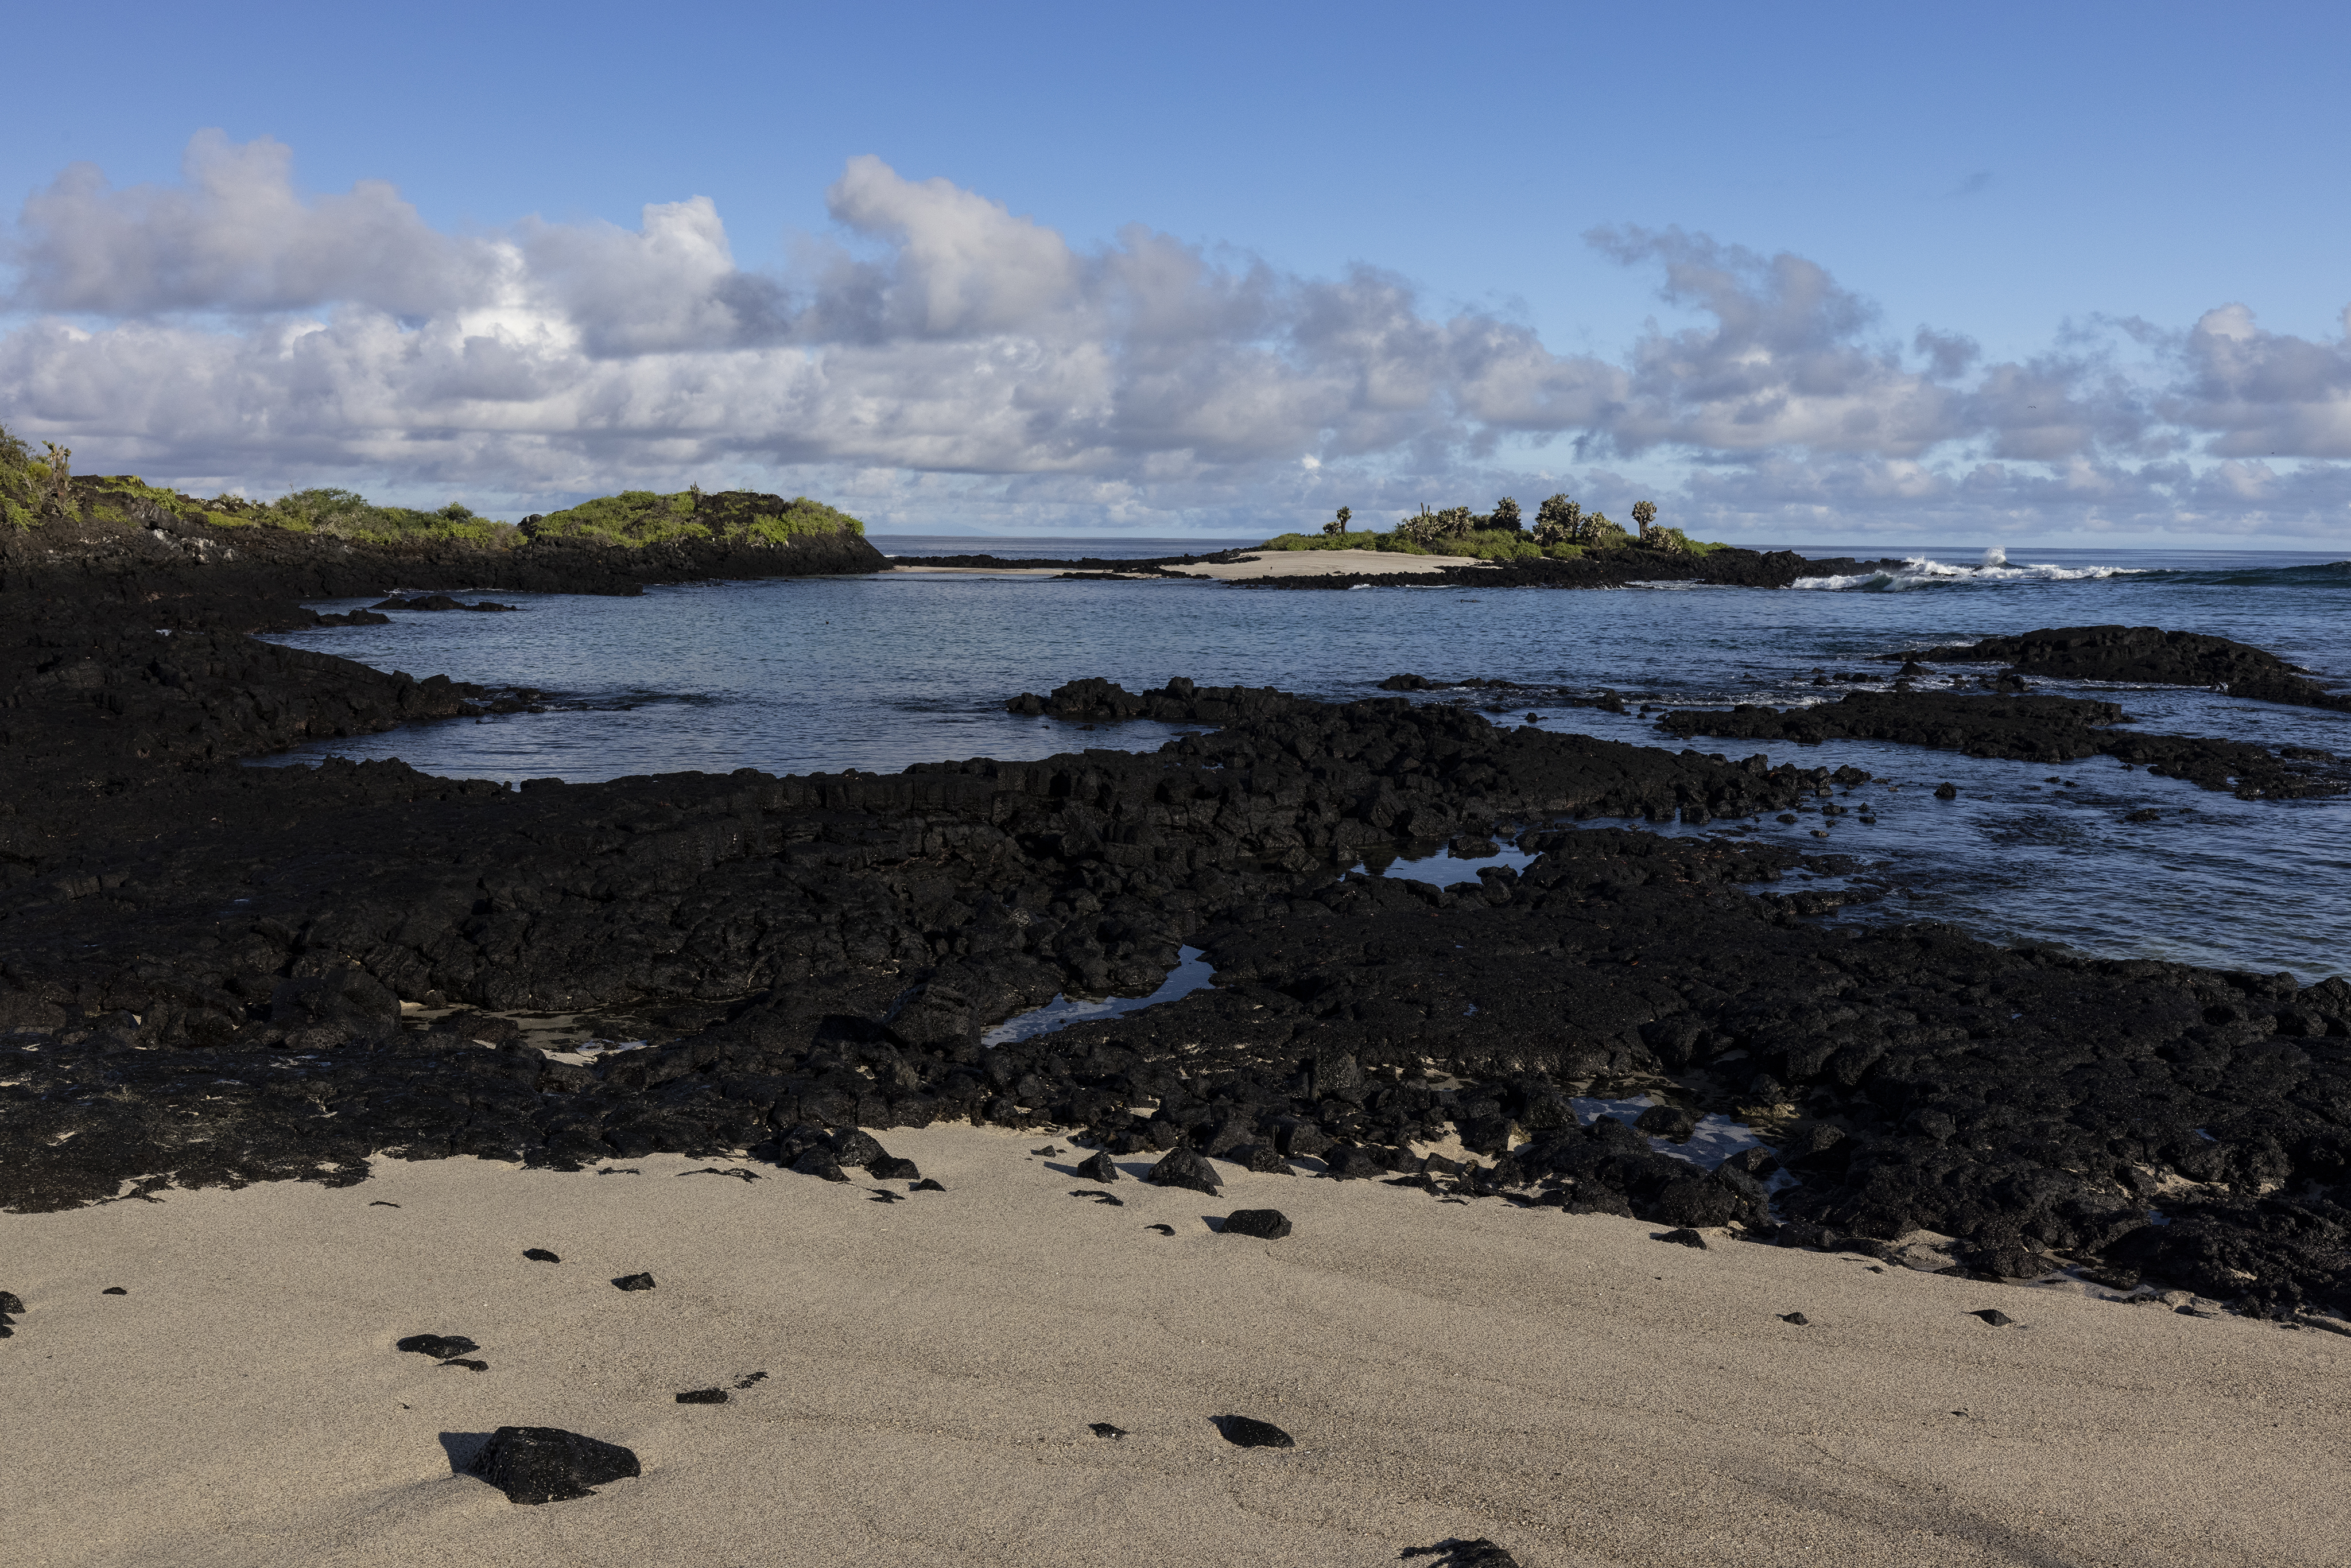 Debt swap for the Galapagos Islands conservation